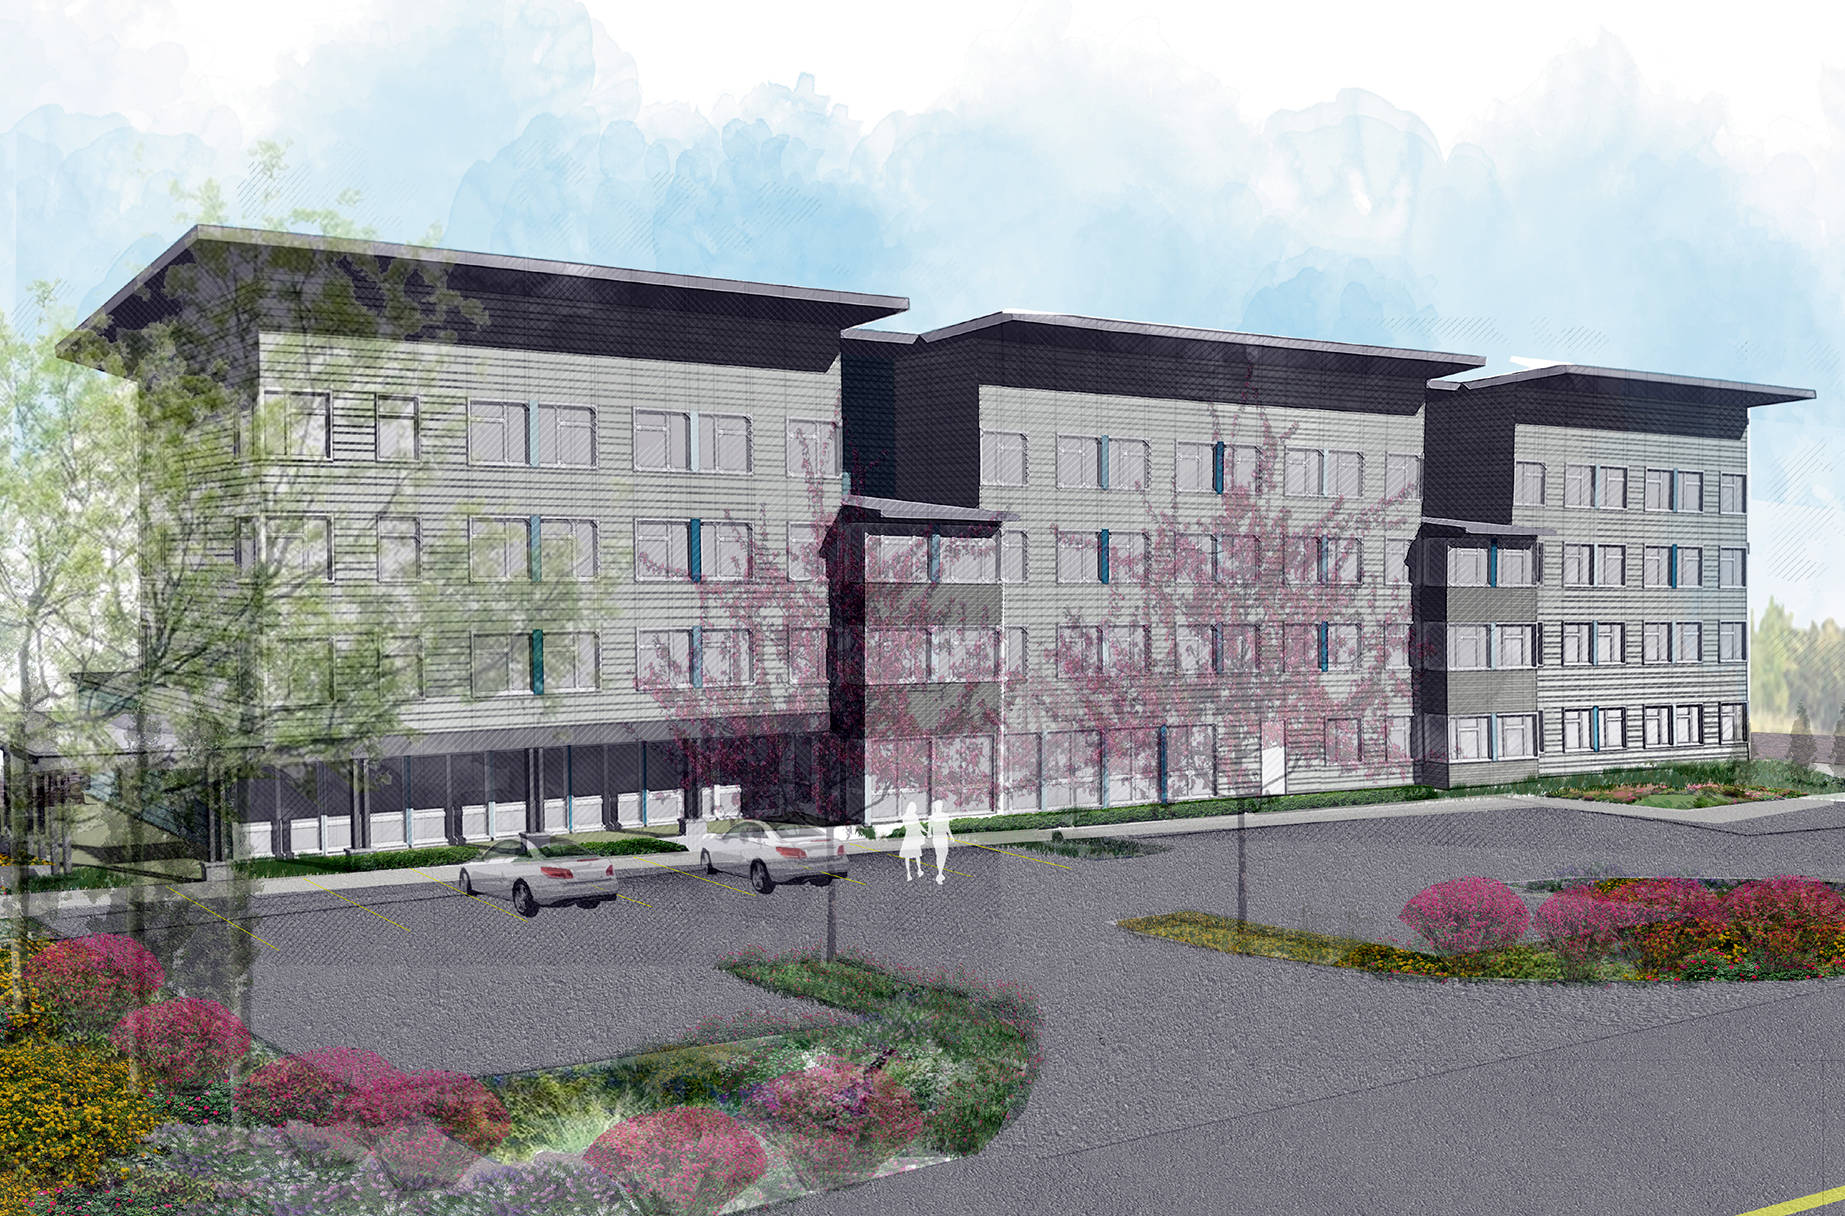 An artist’s rendering shows plans for the Safe Streets housing project designated for Berkshire Drive. (Catholic Housing Services)